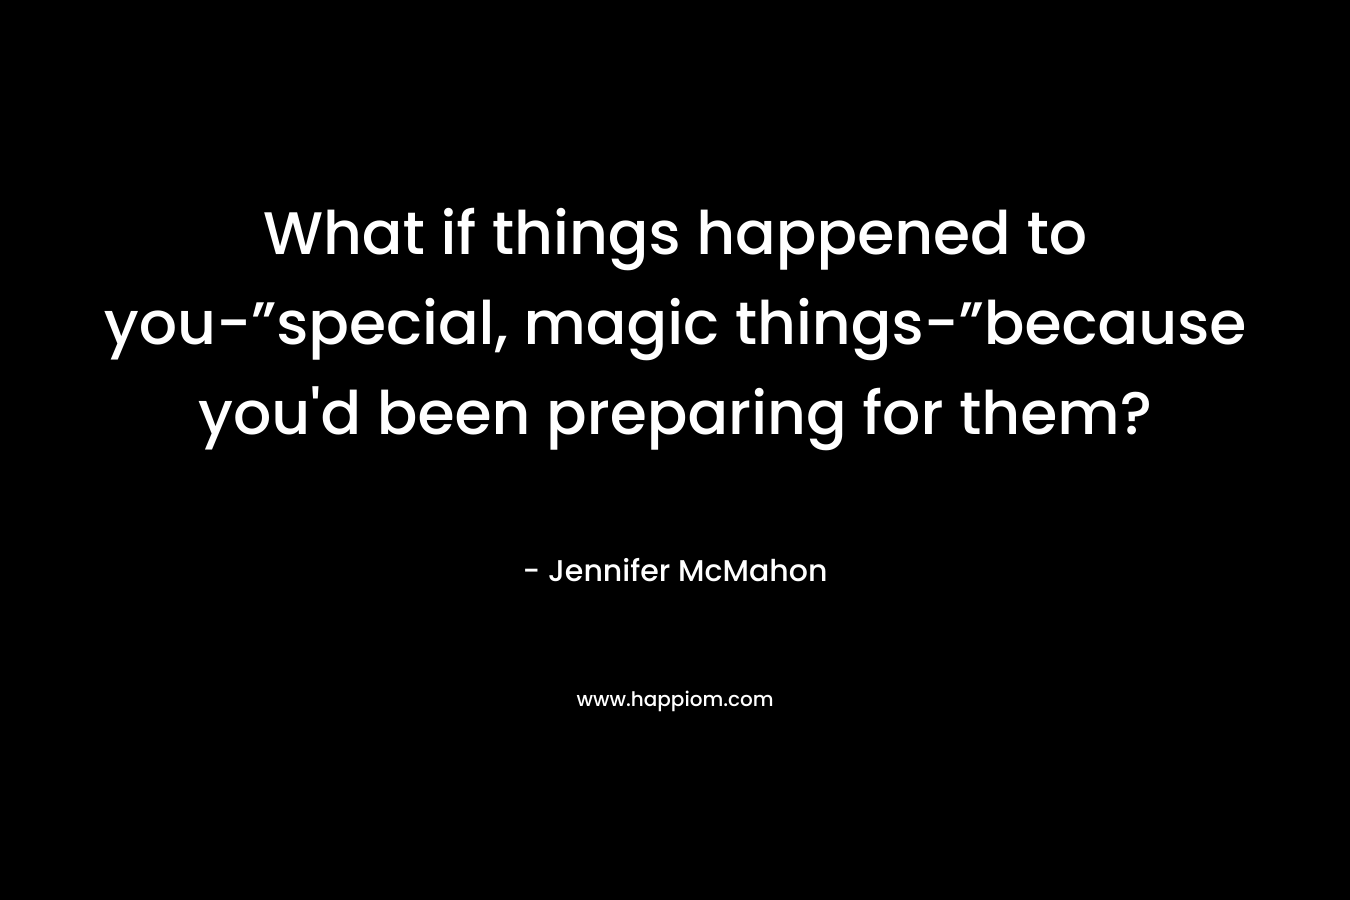 What if things happened to you-”special, magic things-”because you'd been preparing for them?